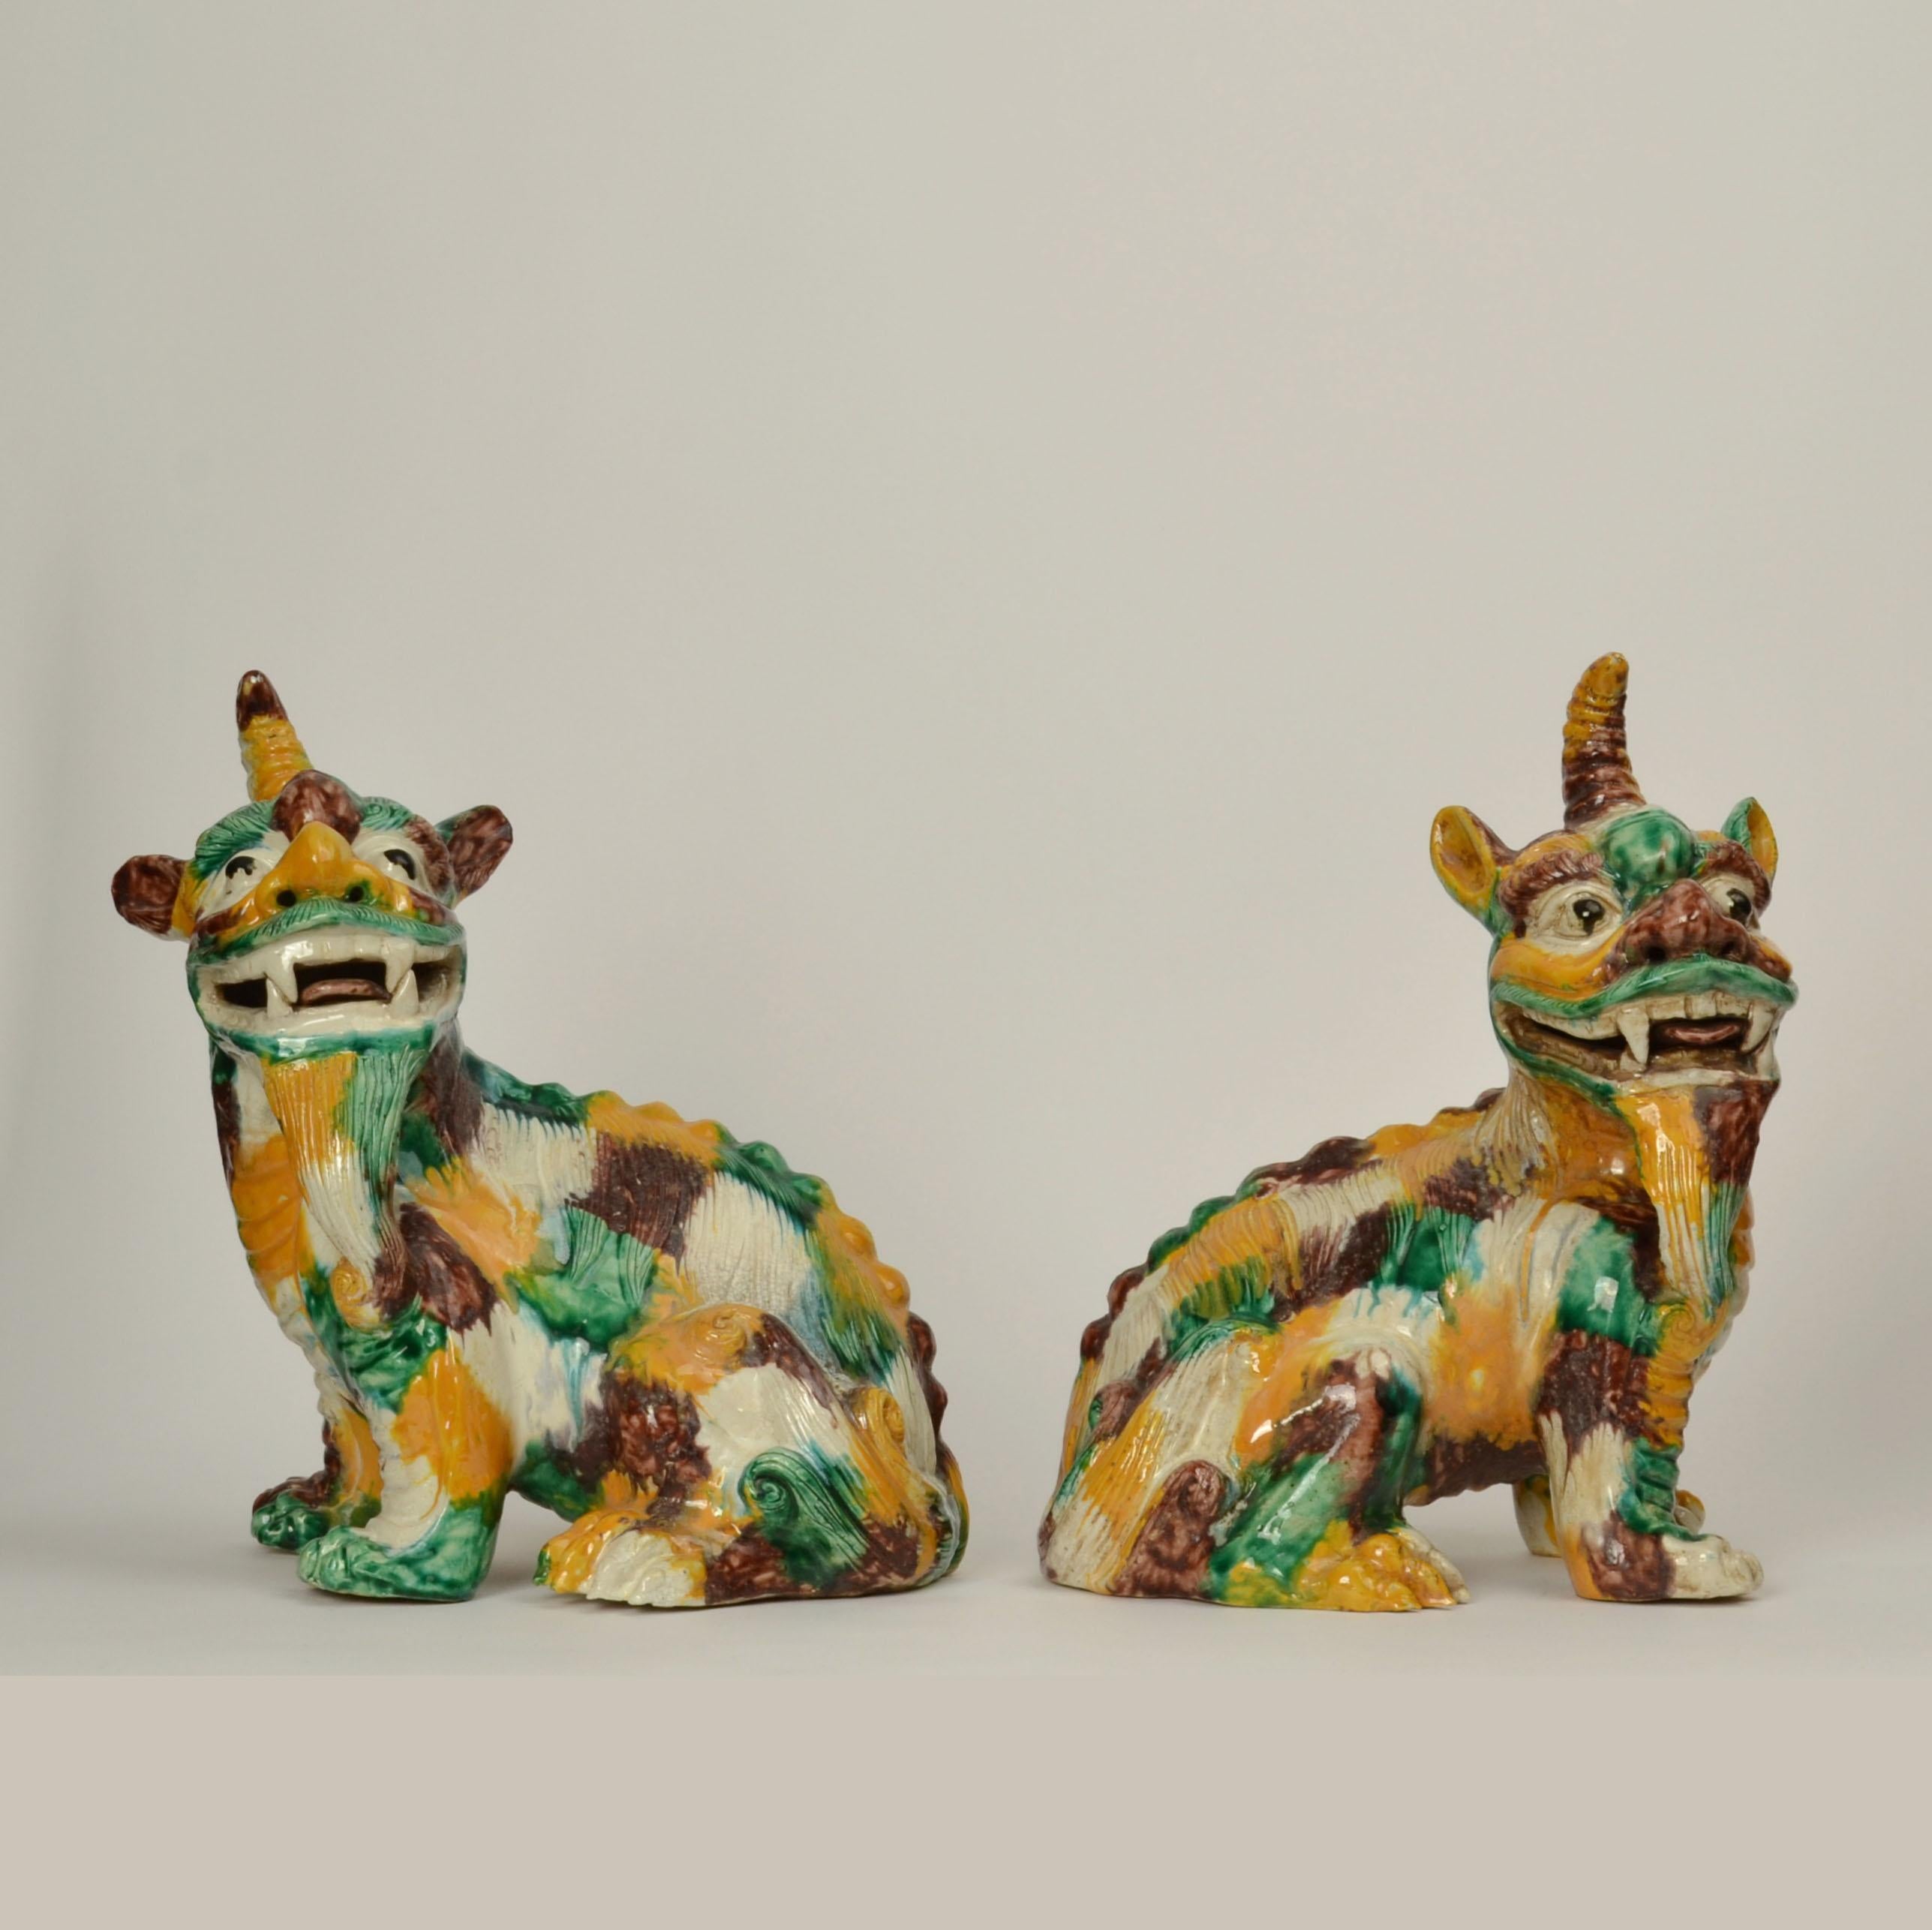 Pair of Qilin 20th century Chinese figures, sancai glazed ceramic. Sancai is a vibrant Chinese slip glaze in predominantly three colours aubergine, amber, green, and white. 
The Qilin is said to have an equine-like body. Thus, the Qilin may have the